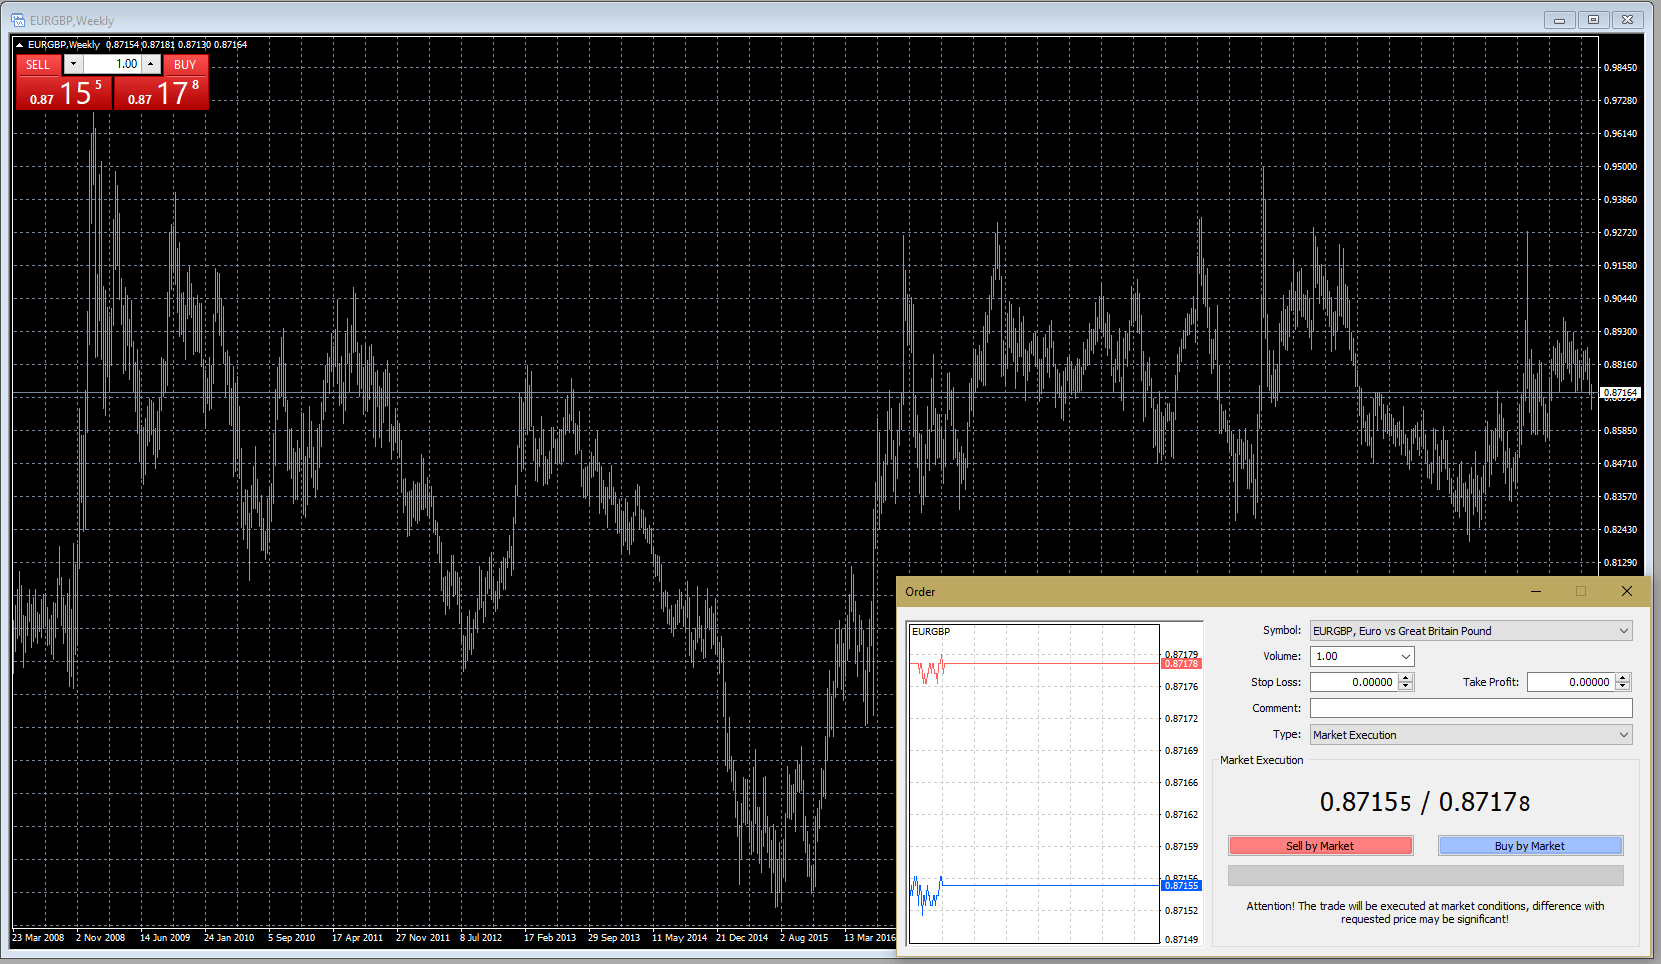 Metatrader 4 technical analysis and order placement with Prospero Markets